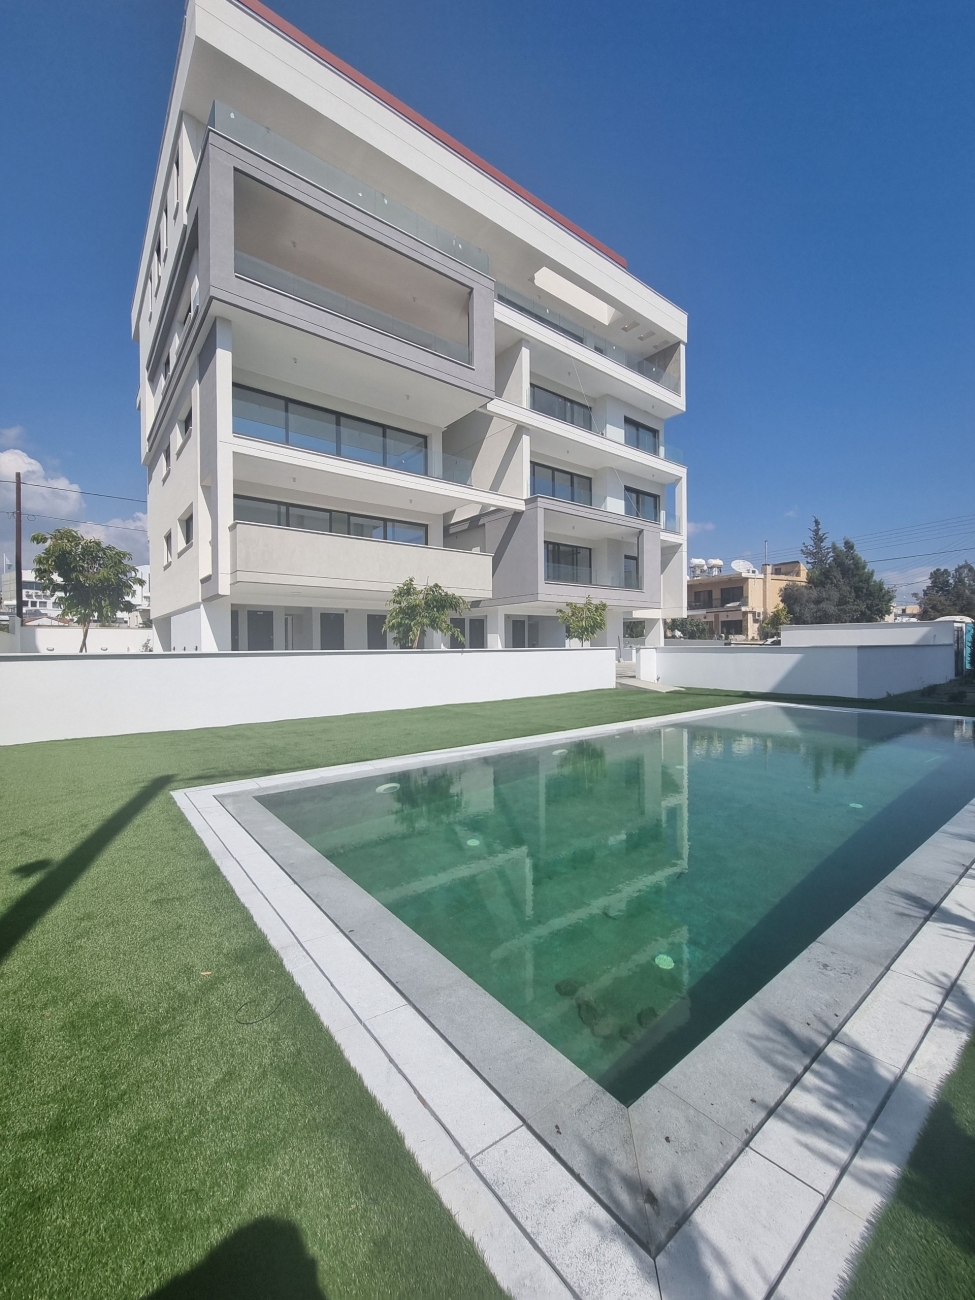 2 Bedroom Apartment for Sale in Germasogeia – Tourist Area, Limassol District